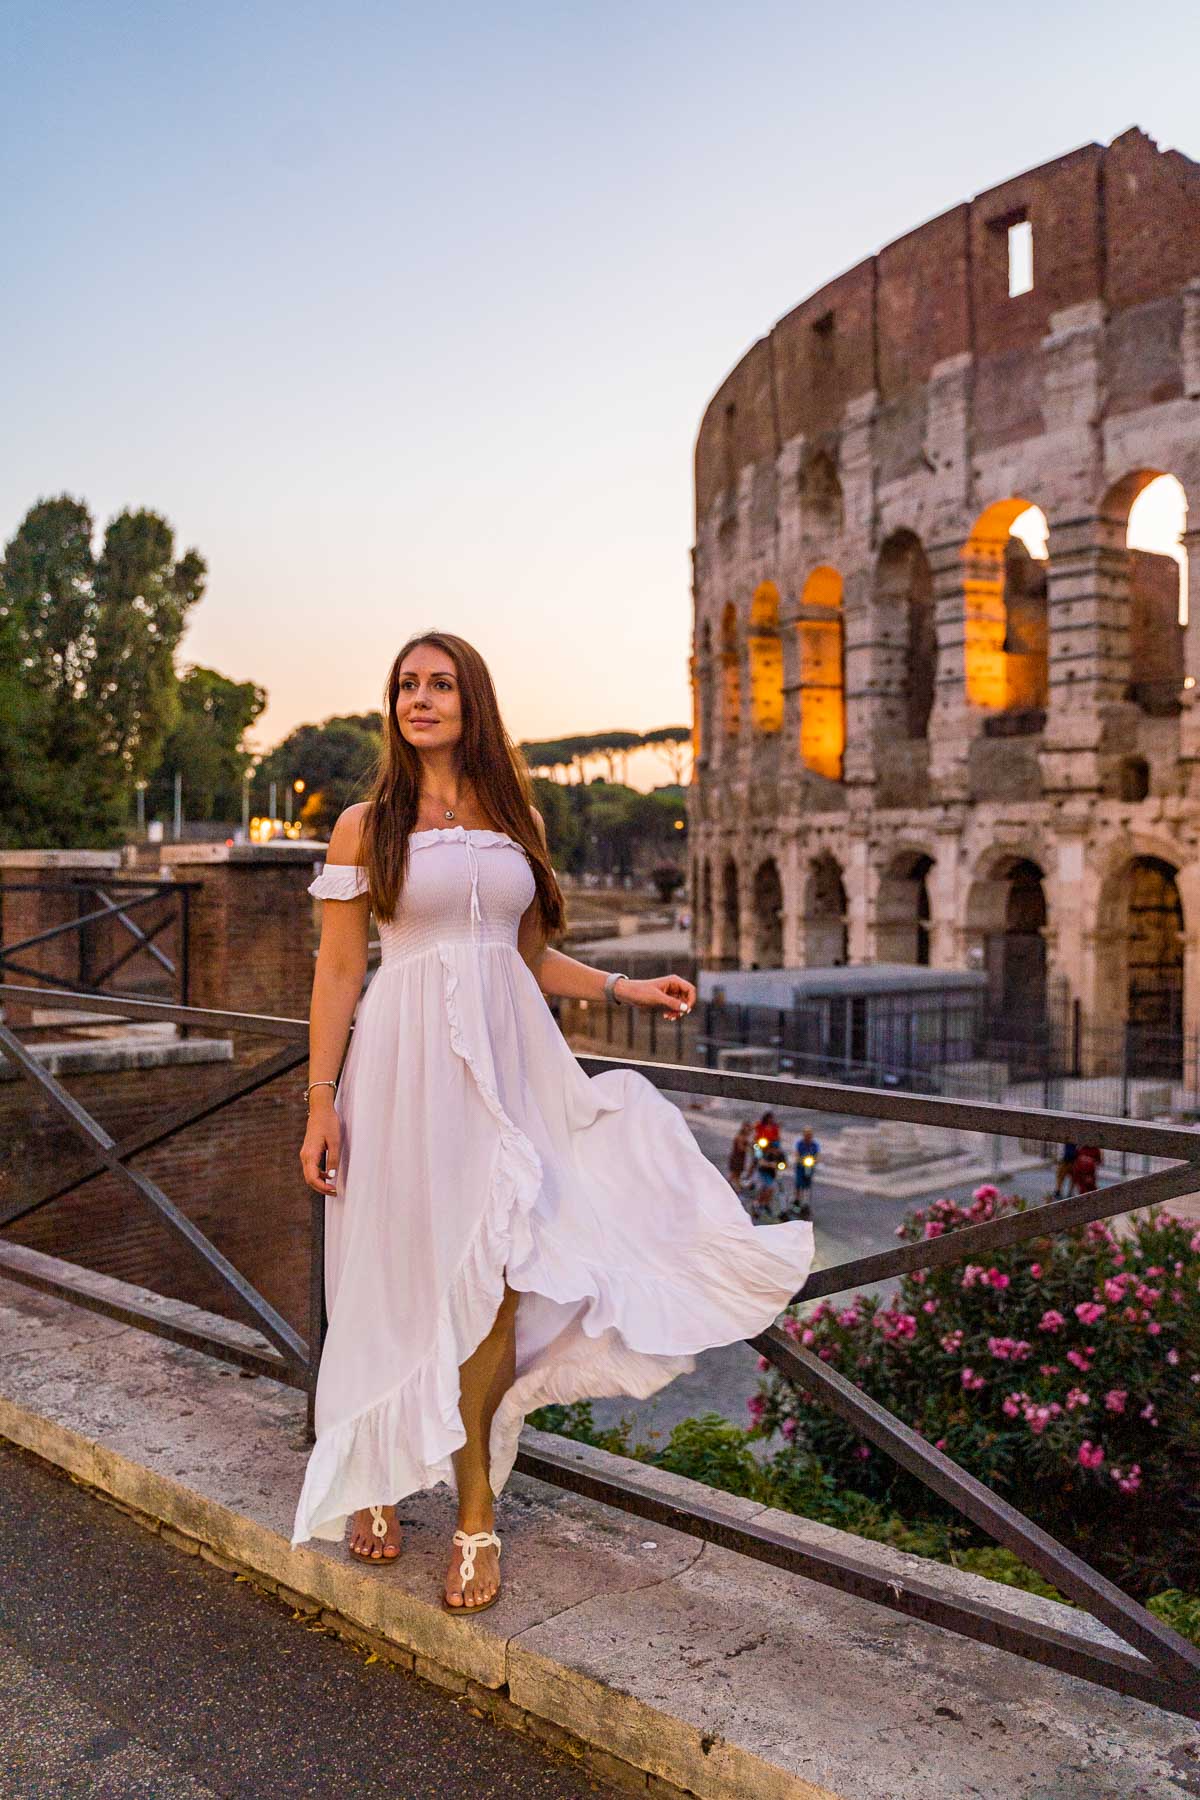 Girl in a white dress in front of the Colosseum at sunset